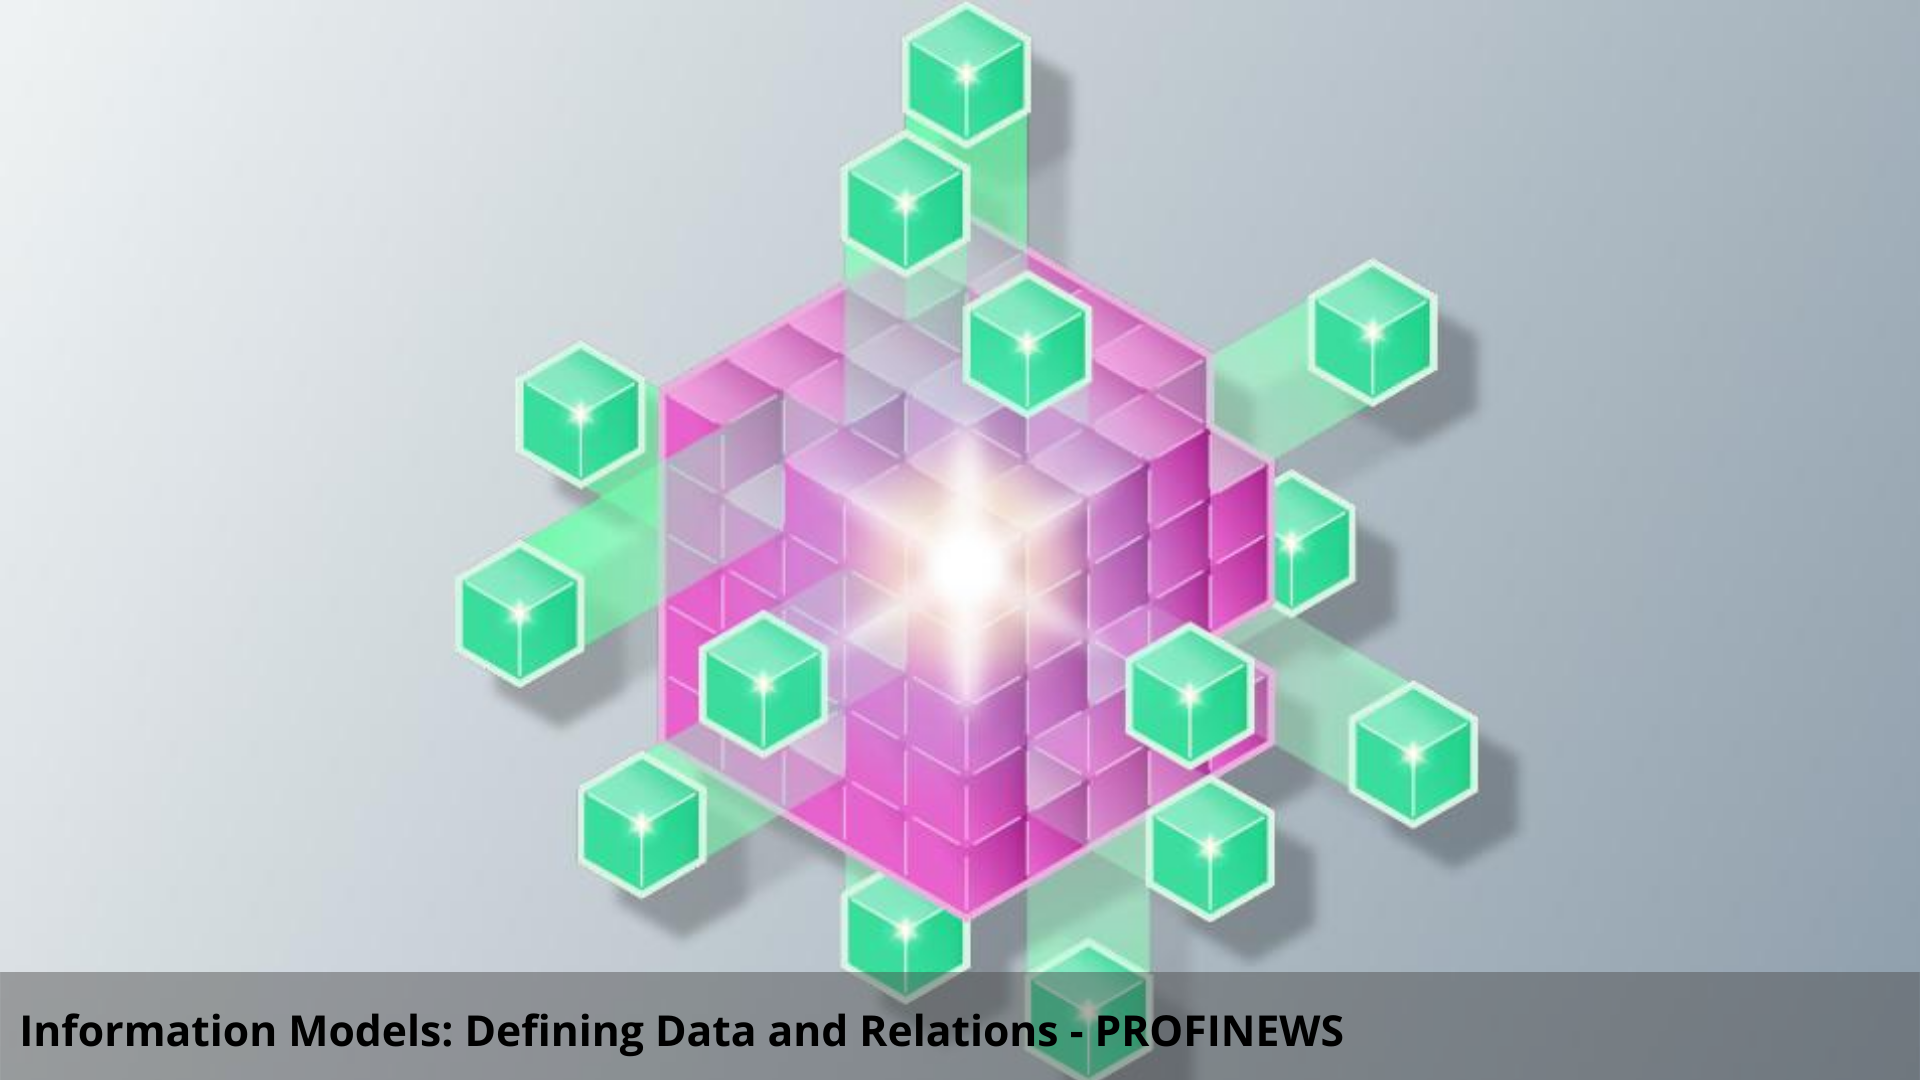 Information Models: Defining Data and Relations